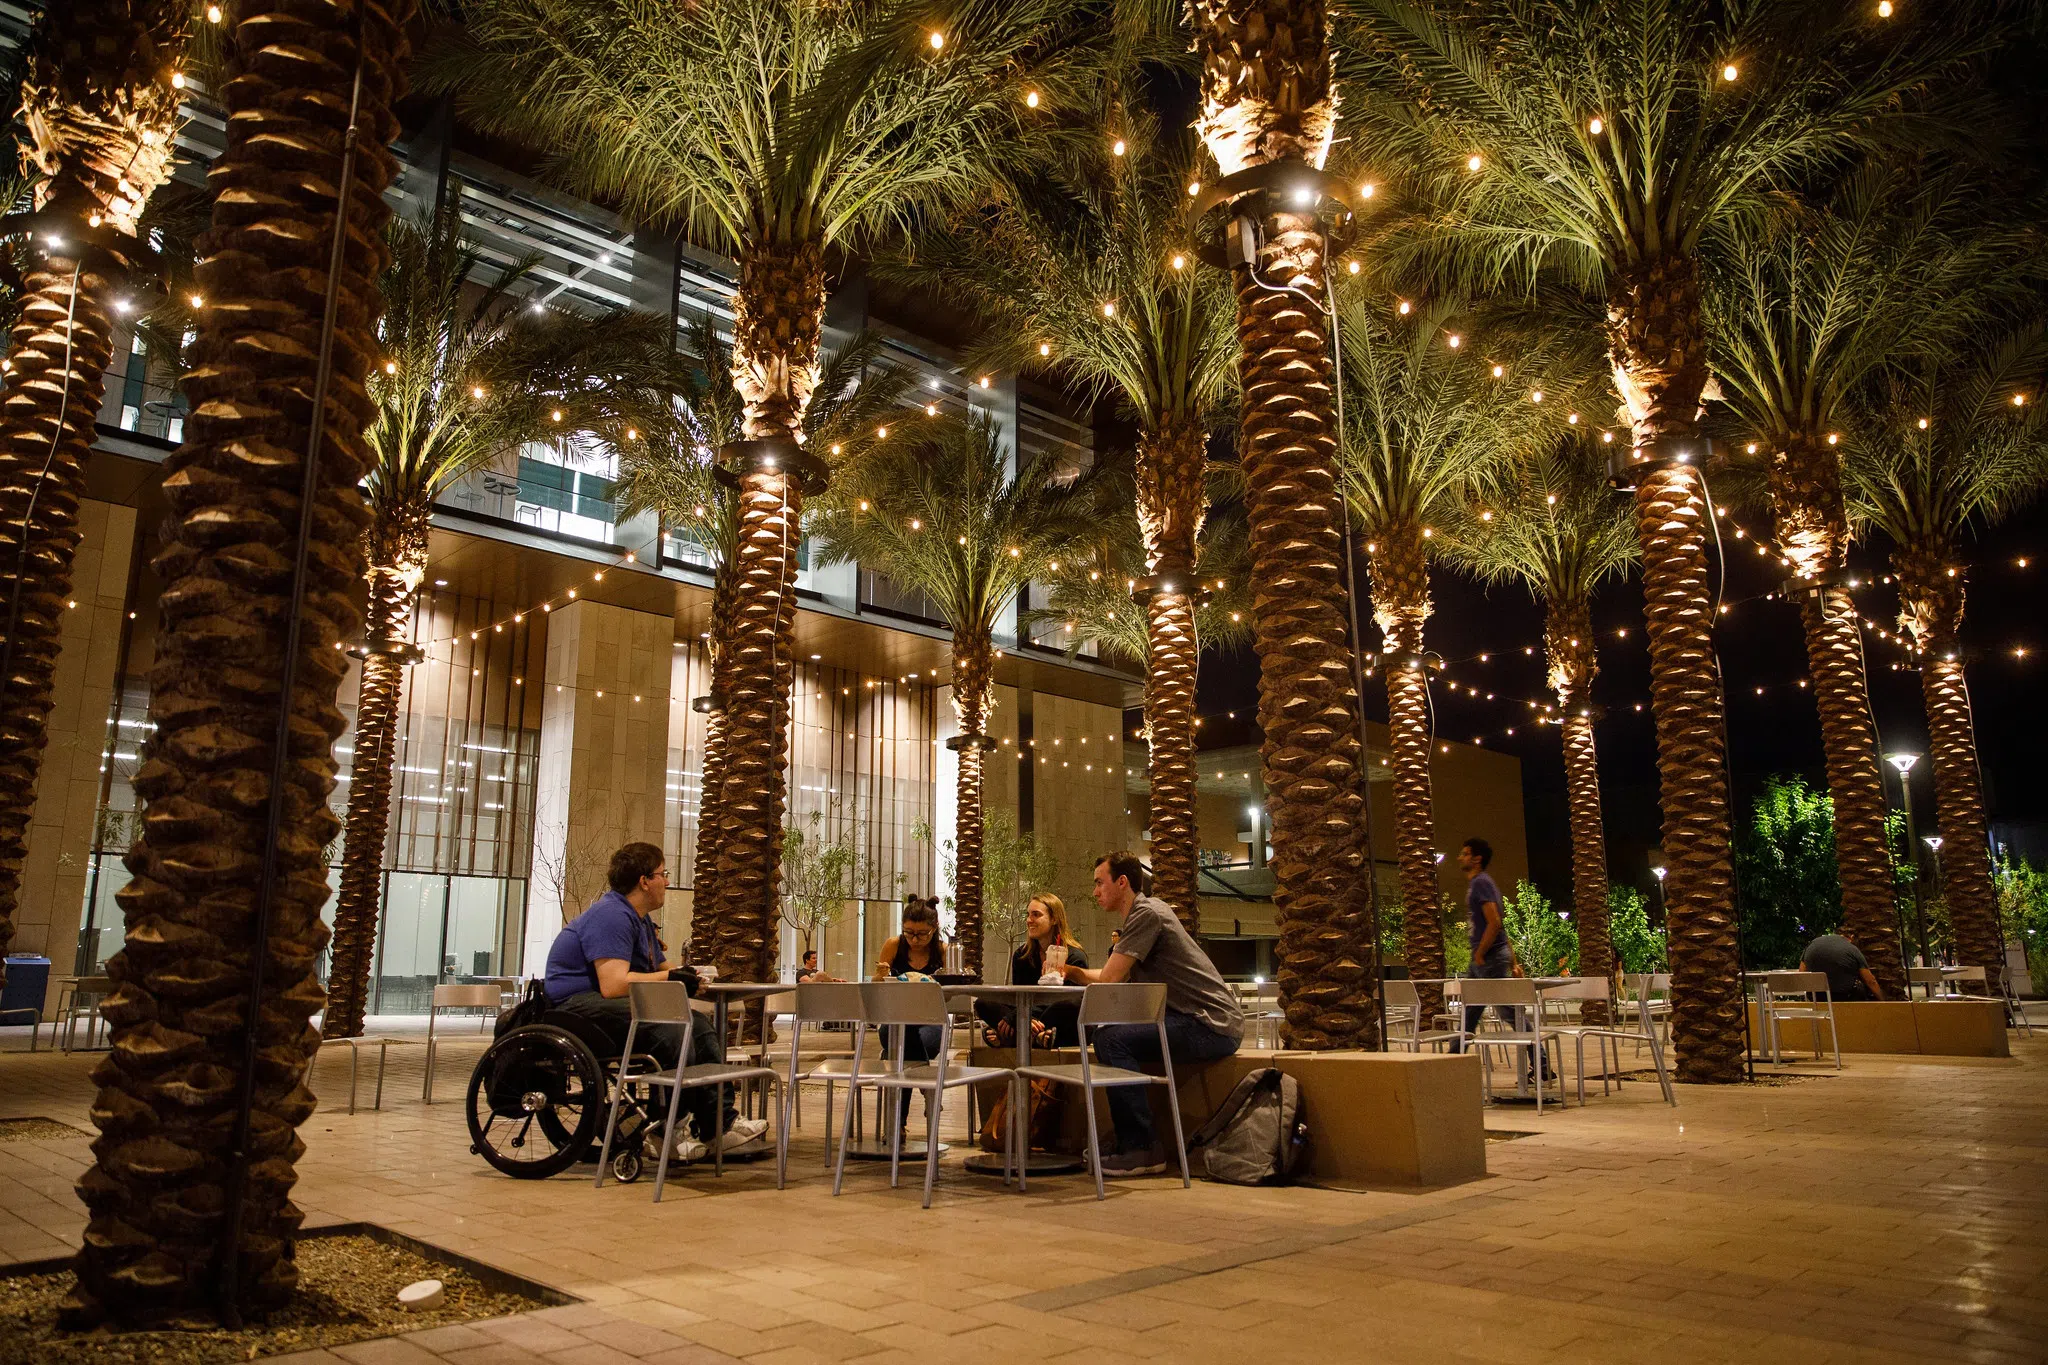 Student a wheelchair sits at a table with three other students outside the Student Pavilion at night. They are surrounded by palm trees with strings of lights hanging from the trees. 